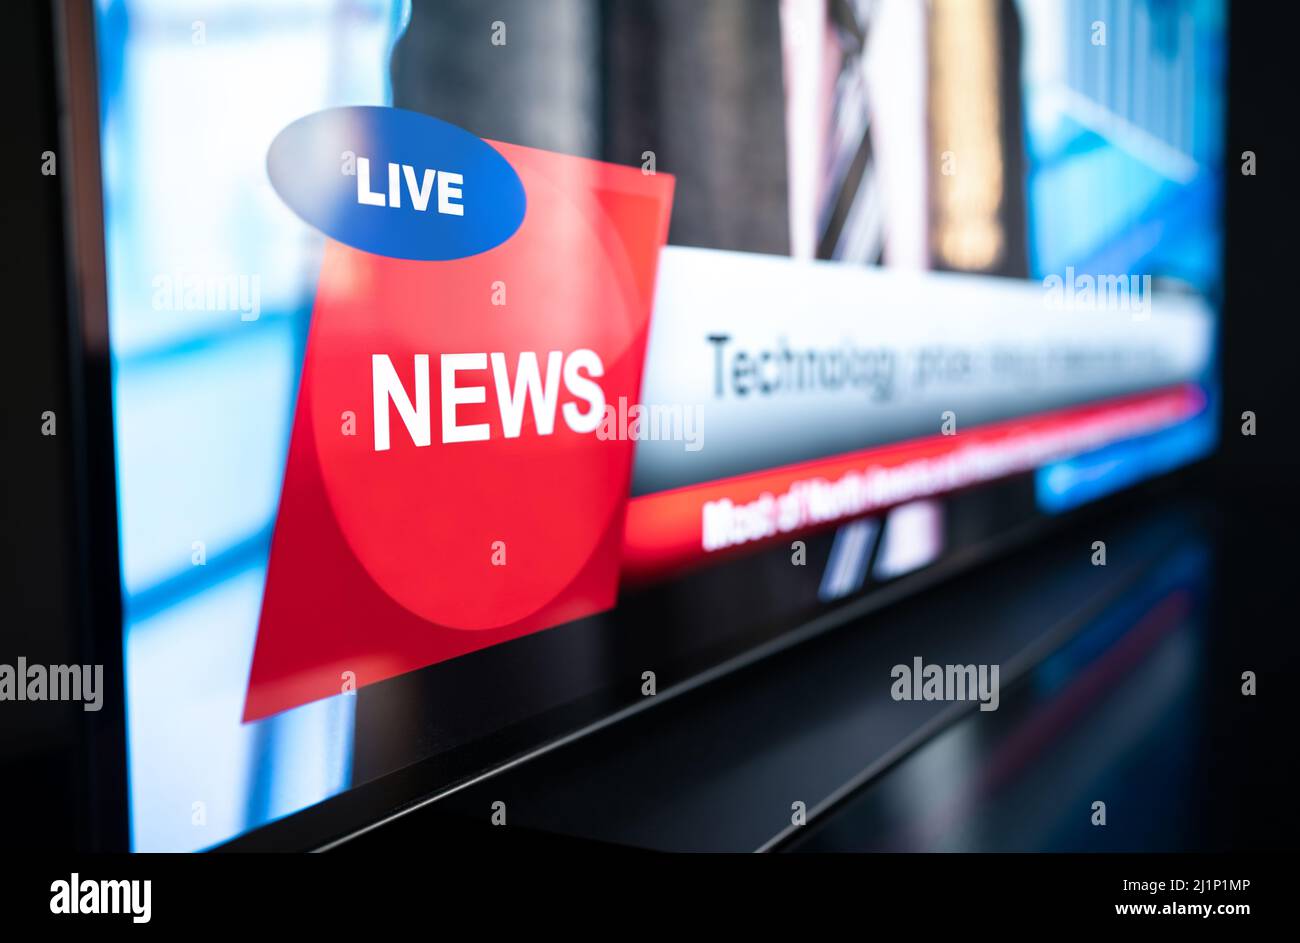 Tv news live broadcast and production concept. Breaking newscast on television. Screen close up of logo mockup, headline text and title banner graphic. Stock Photo